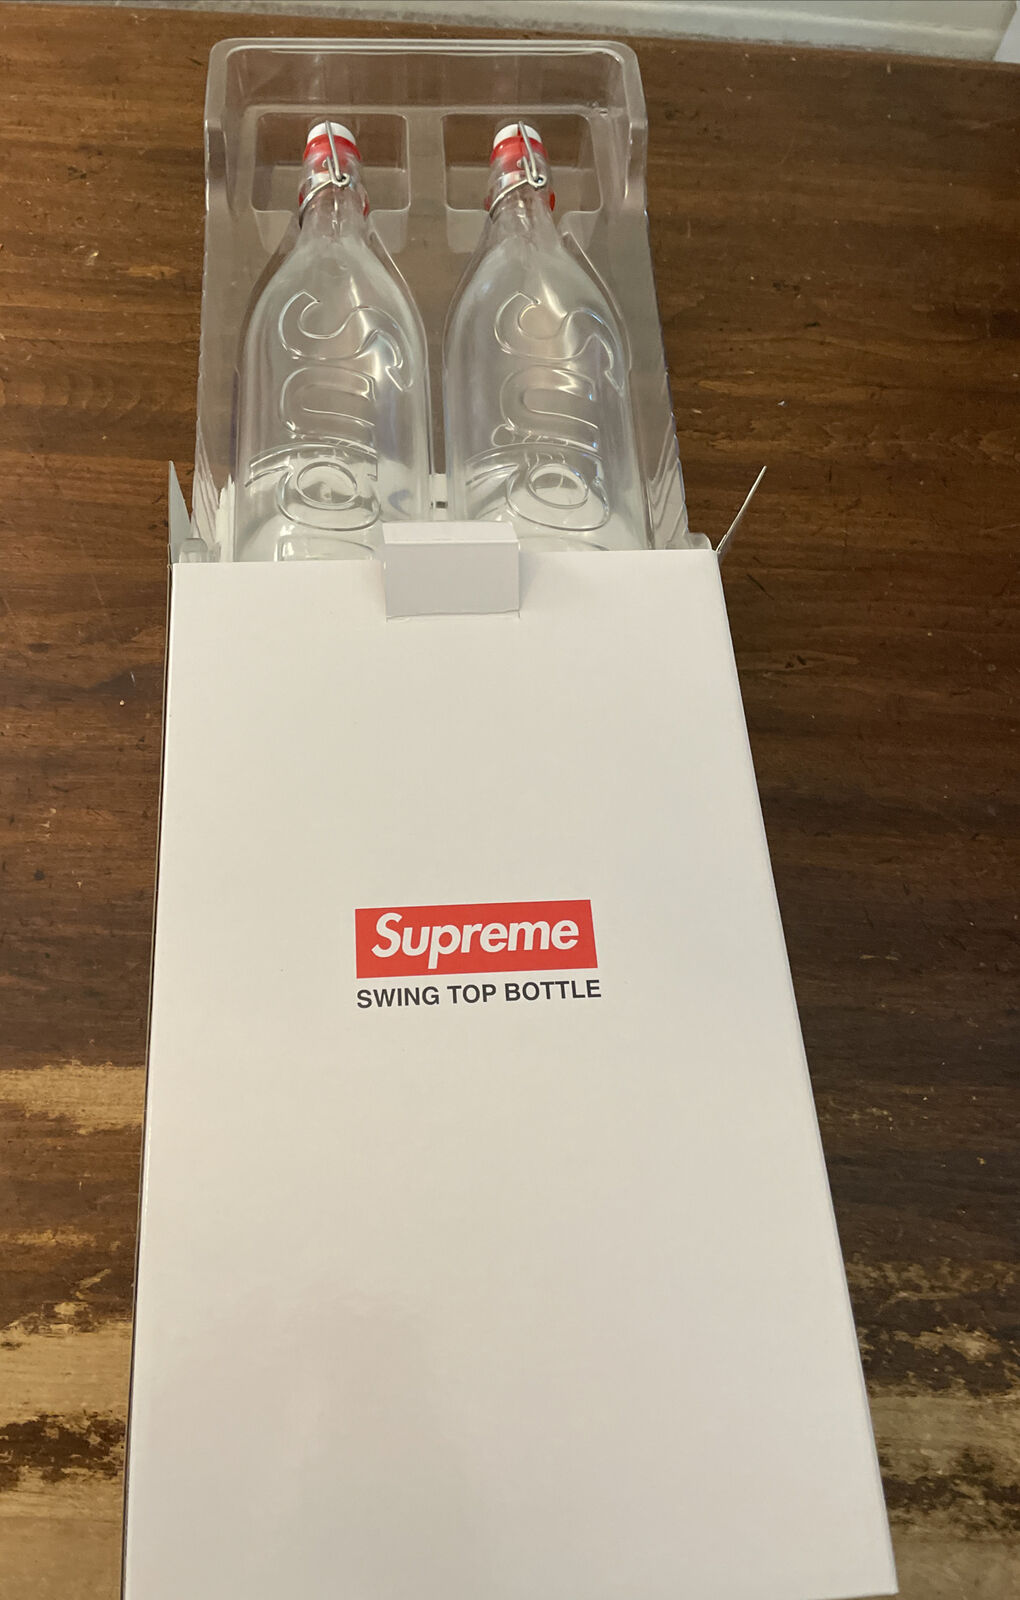 Supreme Swing Top 1.0L Bottle (Set of 2) FW21 WEEK 1 ( BRAND NEW) AUTHENTIC